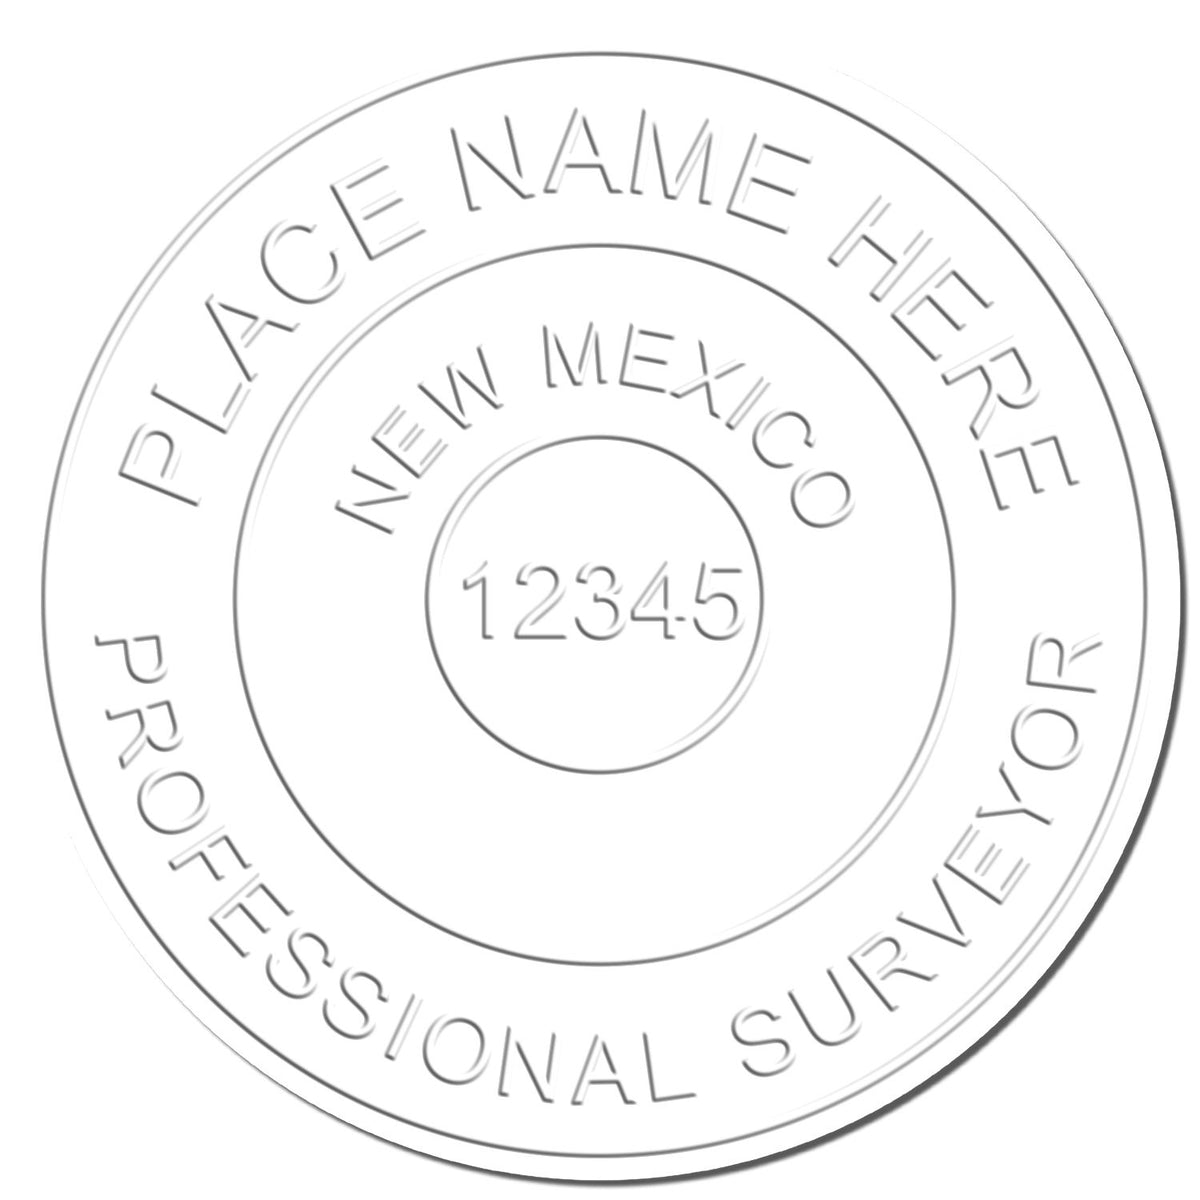 This paper is stamped with a sample imprint of the State of New Mexico Soft Land Surveyor Embossing Seal, signifying its quality and reliability.